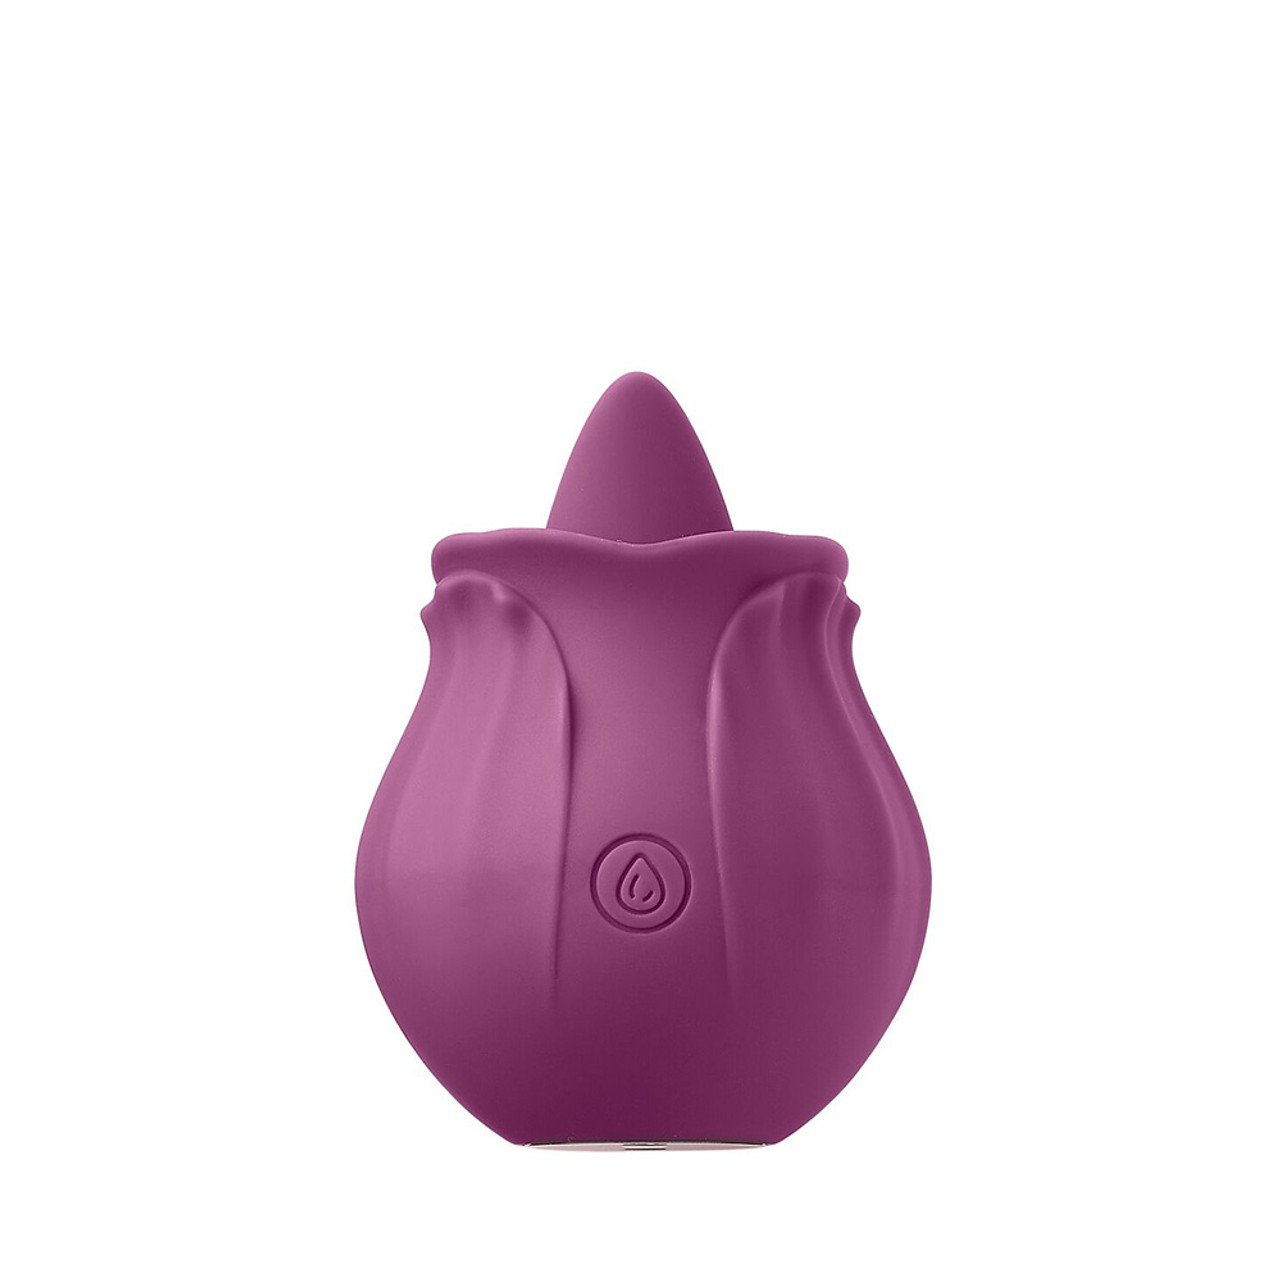 Silky-Soft Body-Safe Silicone Vibrator in Westlands - Sexual Wellness,  Quest Technologies